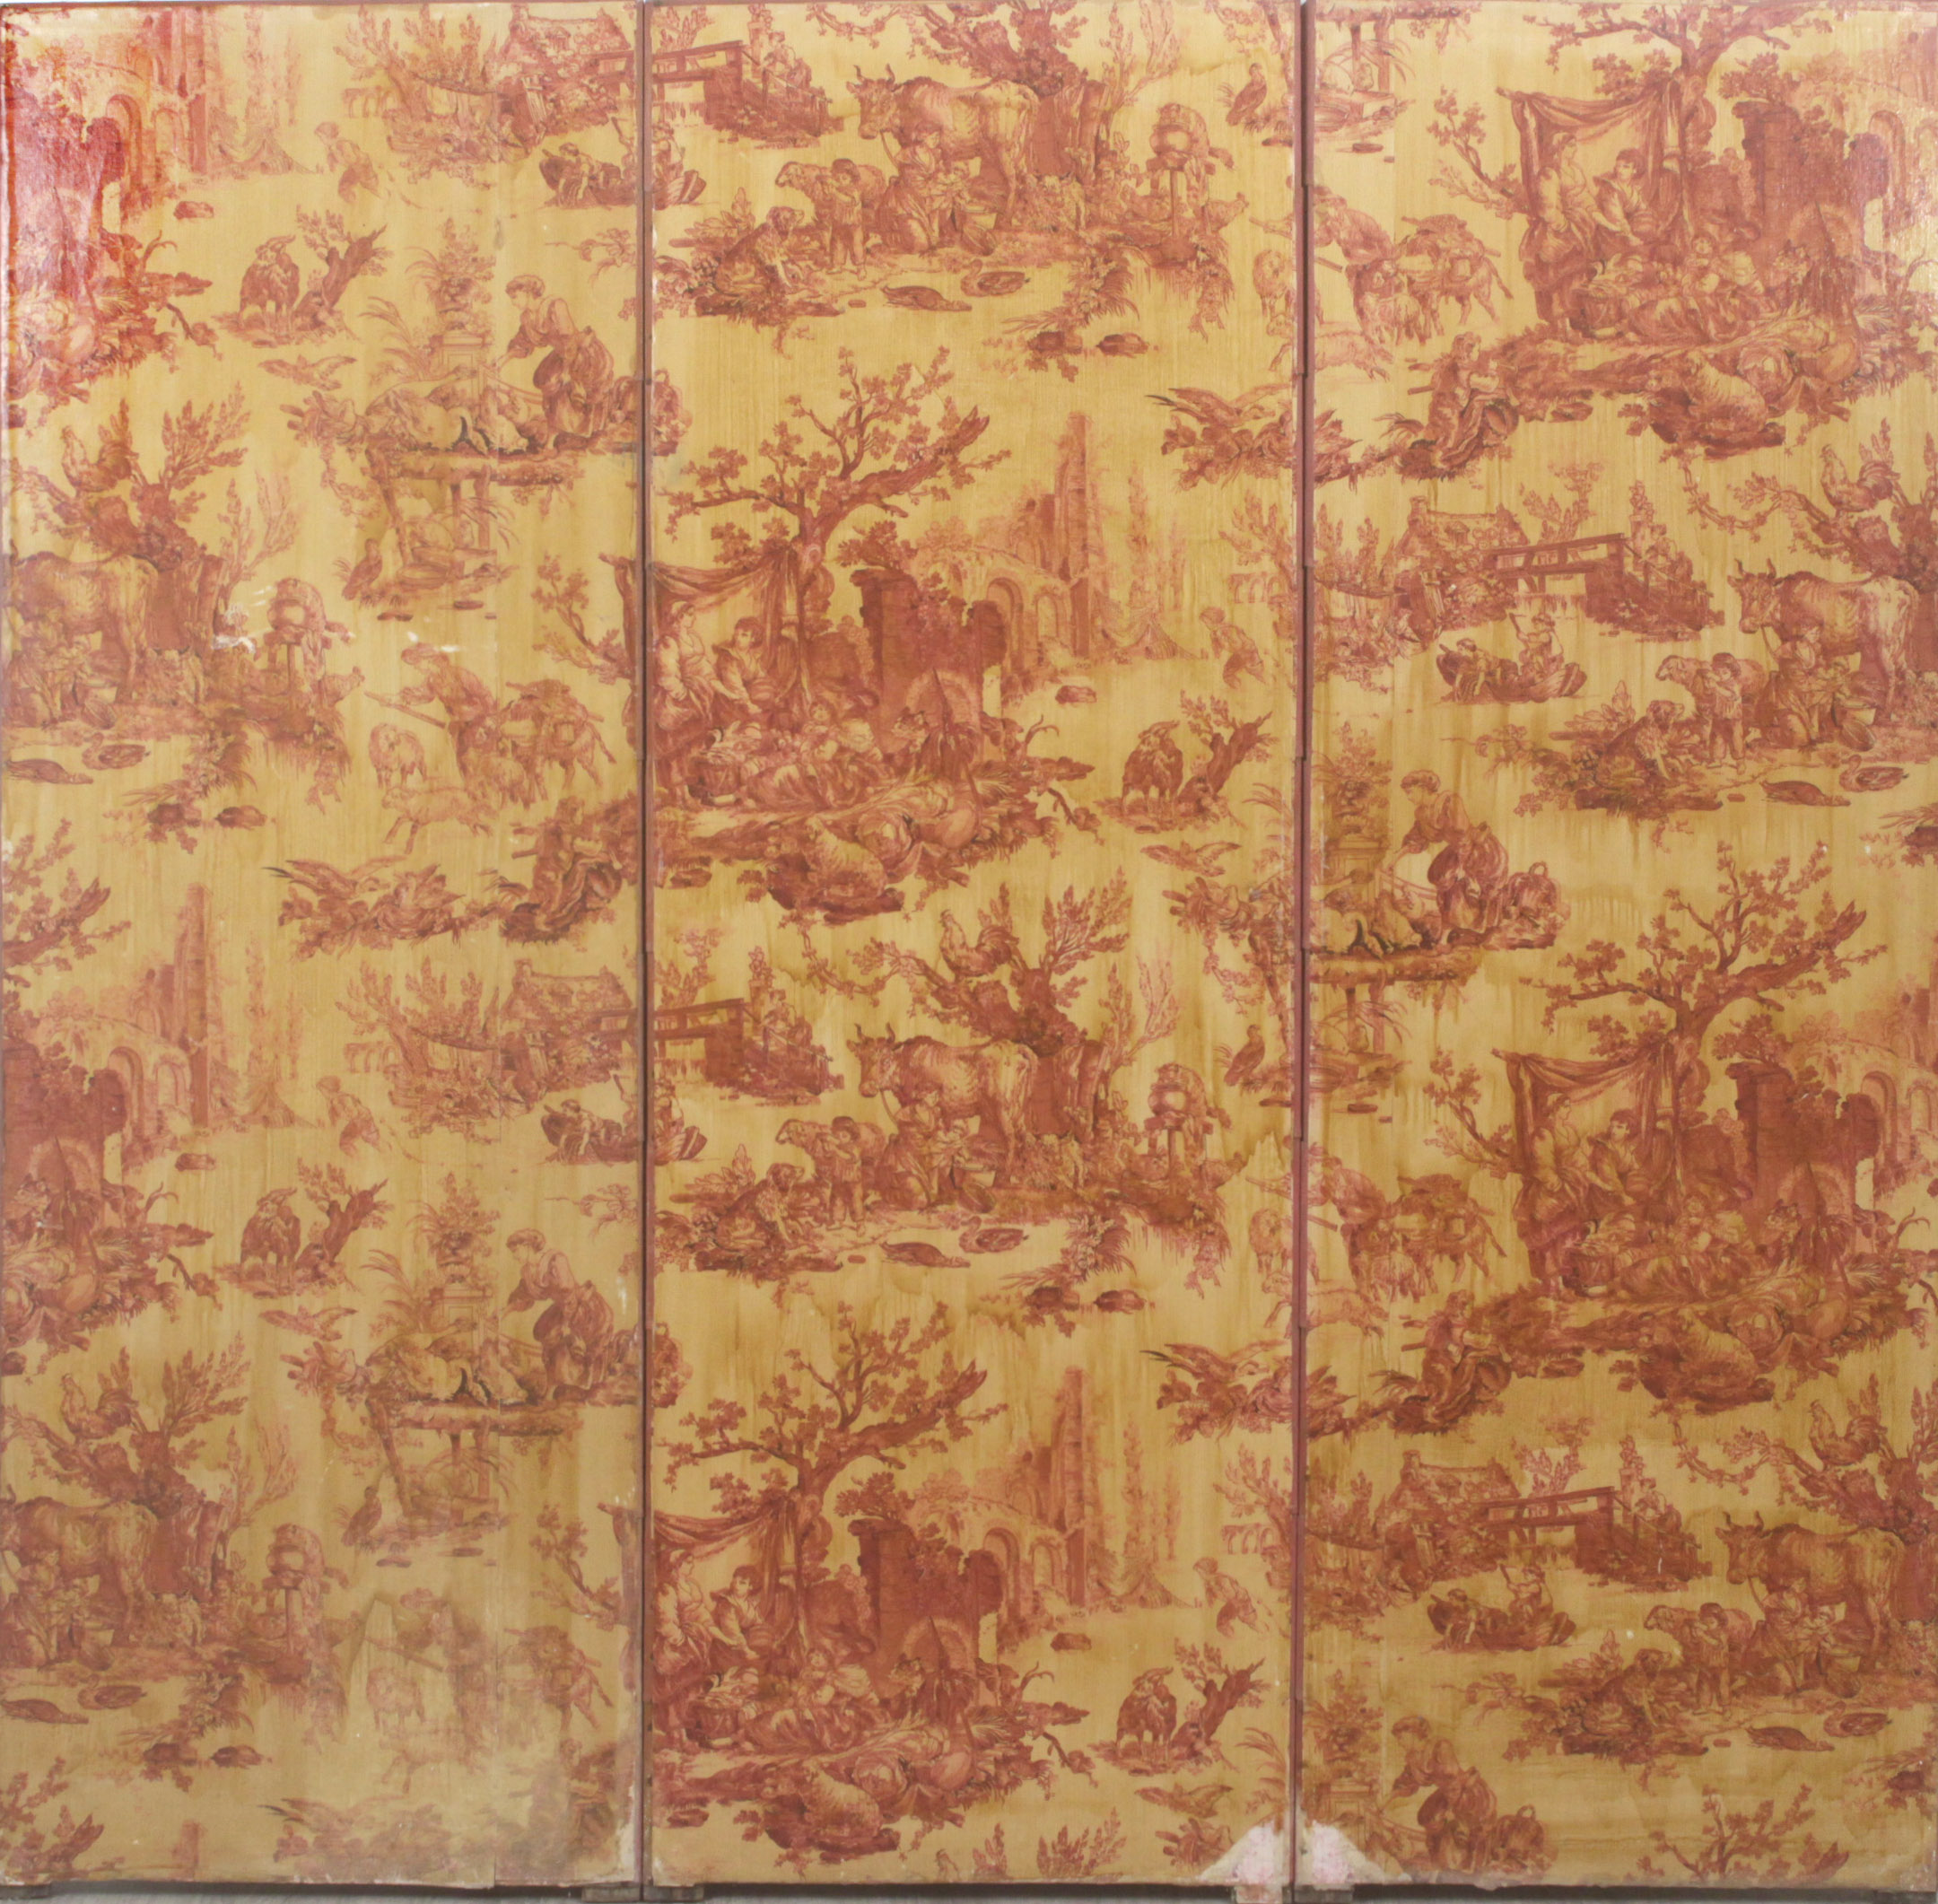 A first half of 20th century three panel folding screen - Image 3 of 3